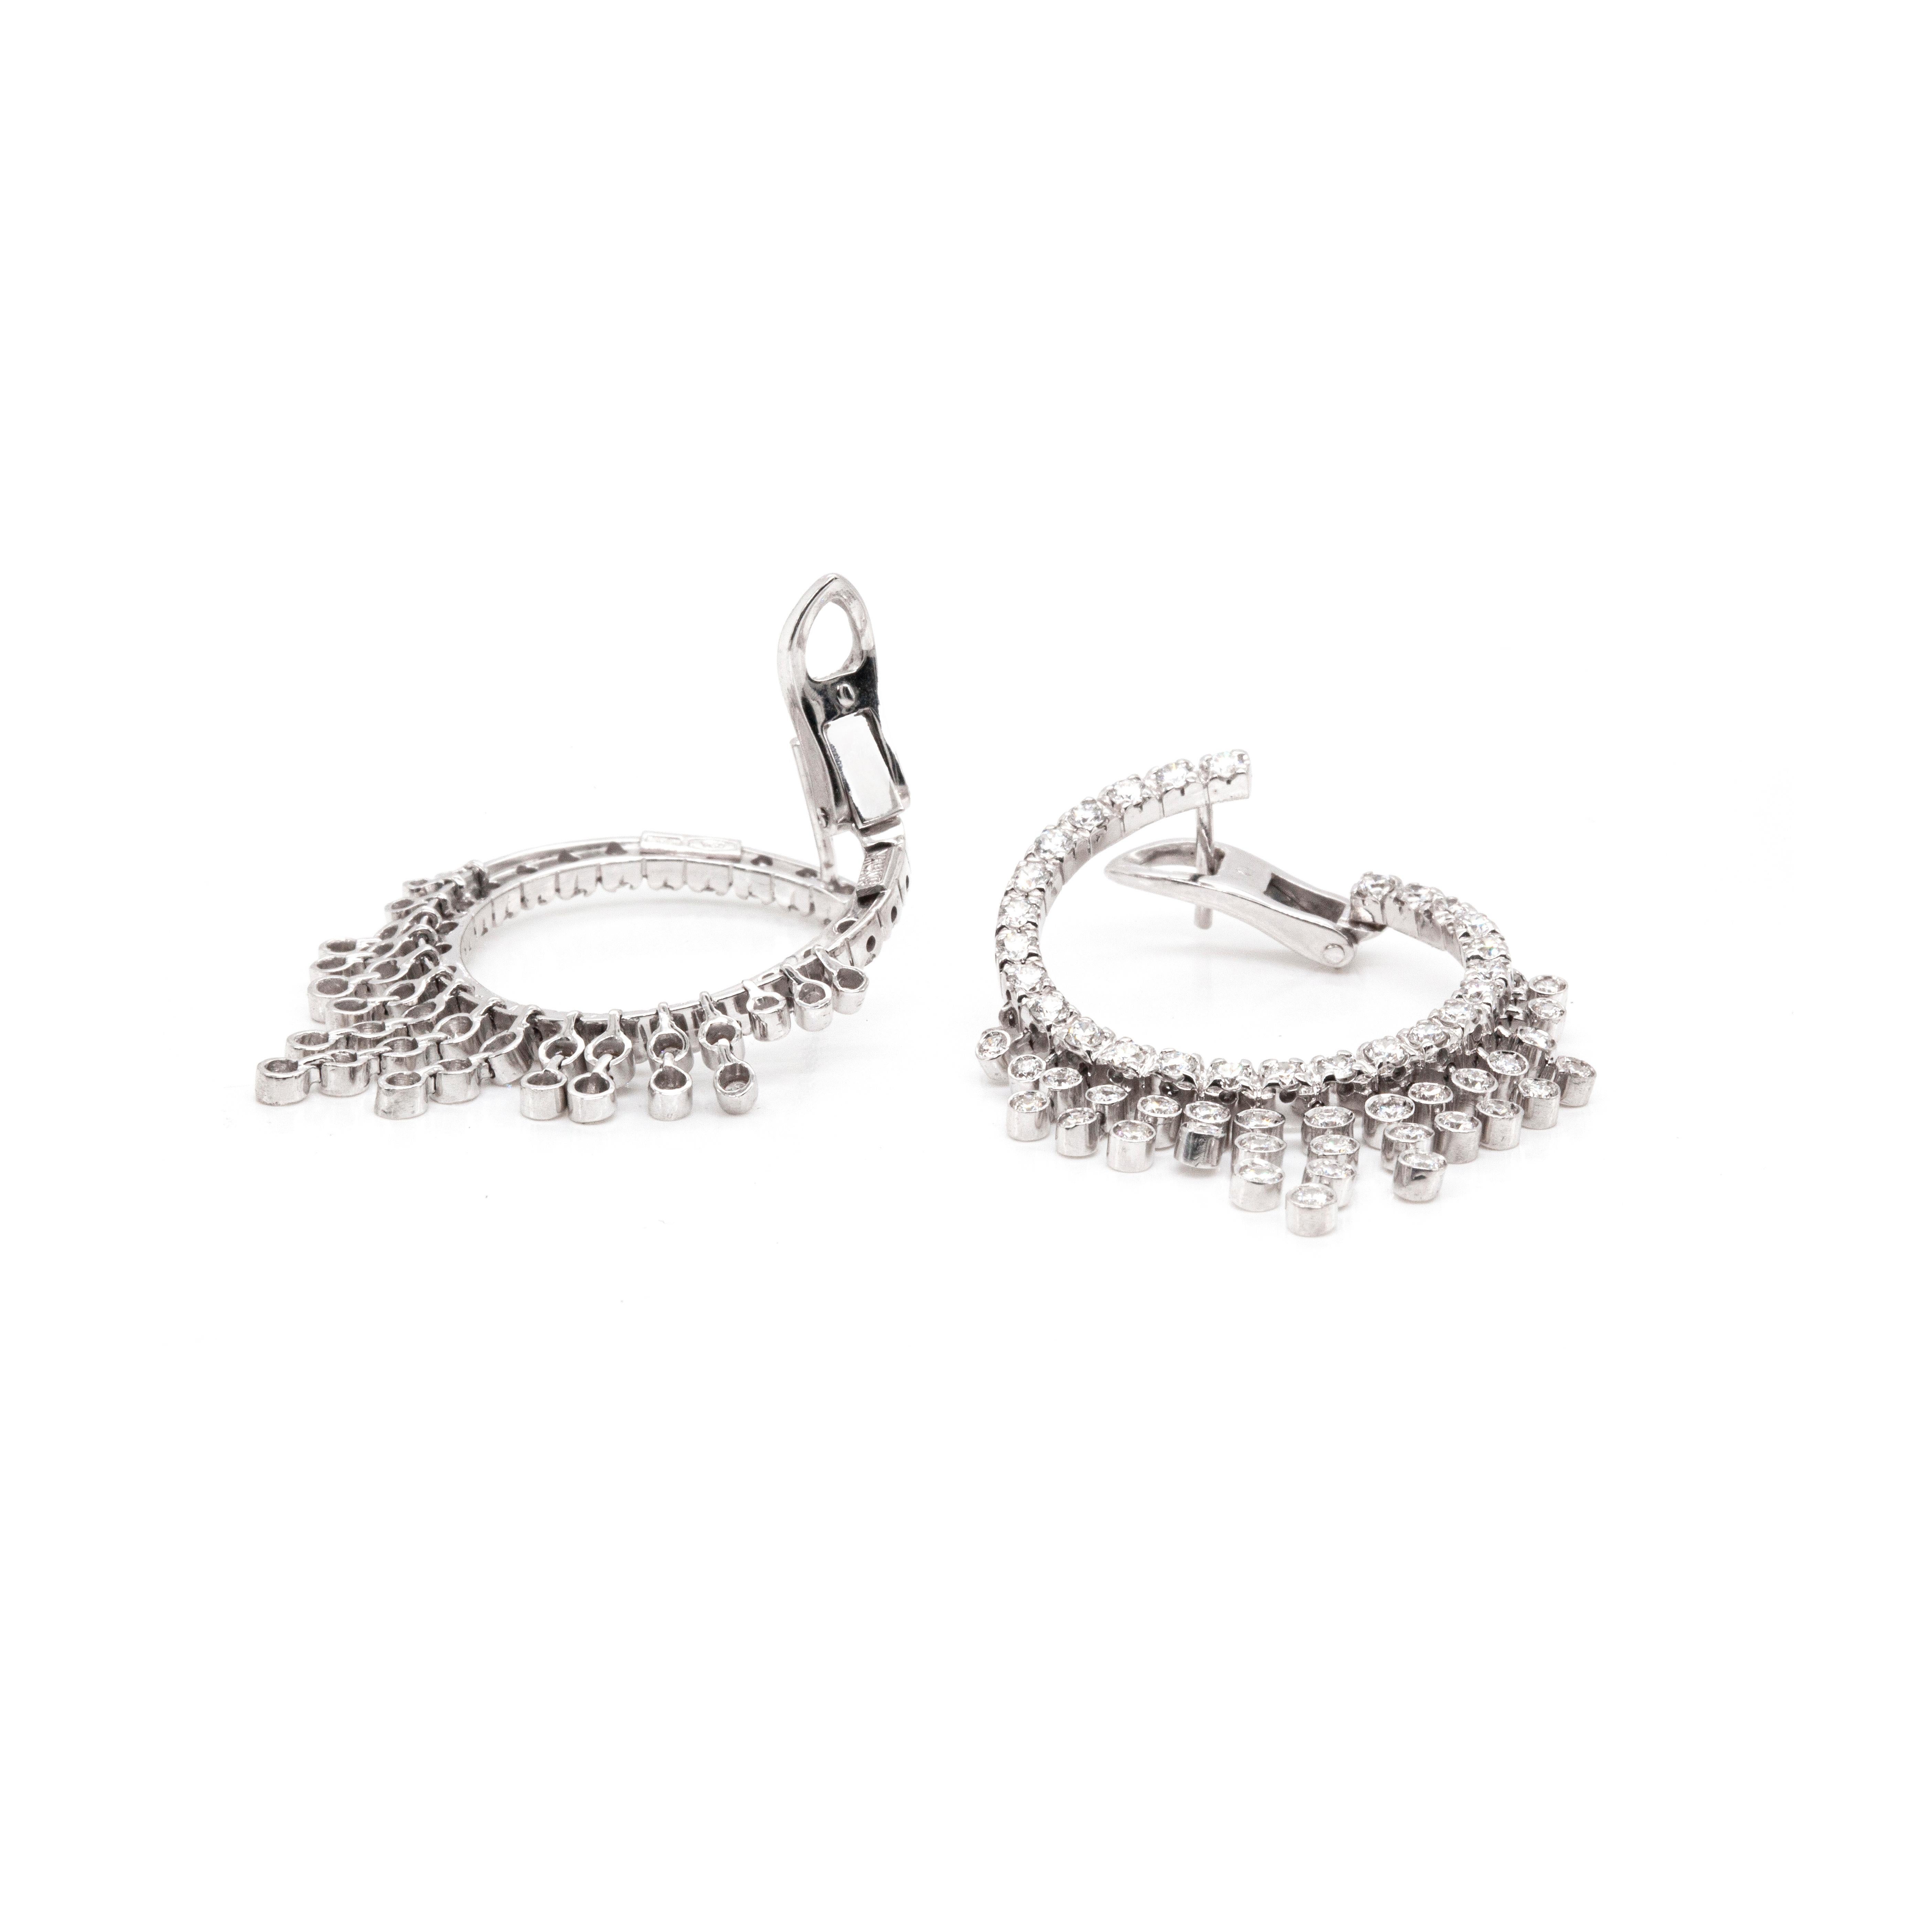 These gorgeous Valente Milano earrings are a beautiful twist on classic diamond-set hoops, balancing sparkle with elegance. Designed to sit side-on (as opposed to traditional front to back hoops), all of the scintillating high quality diamonds are